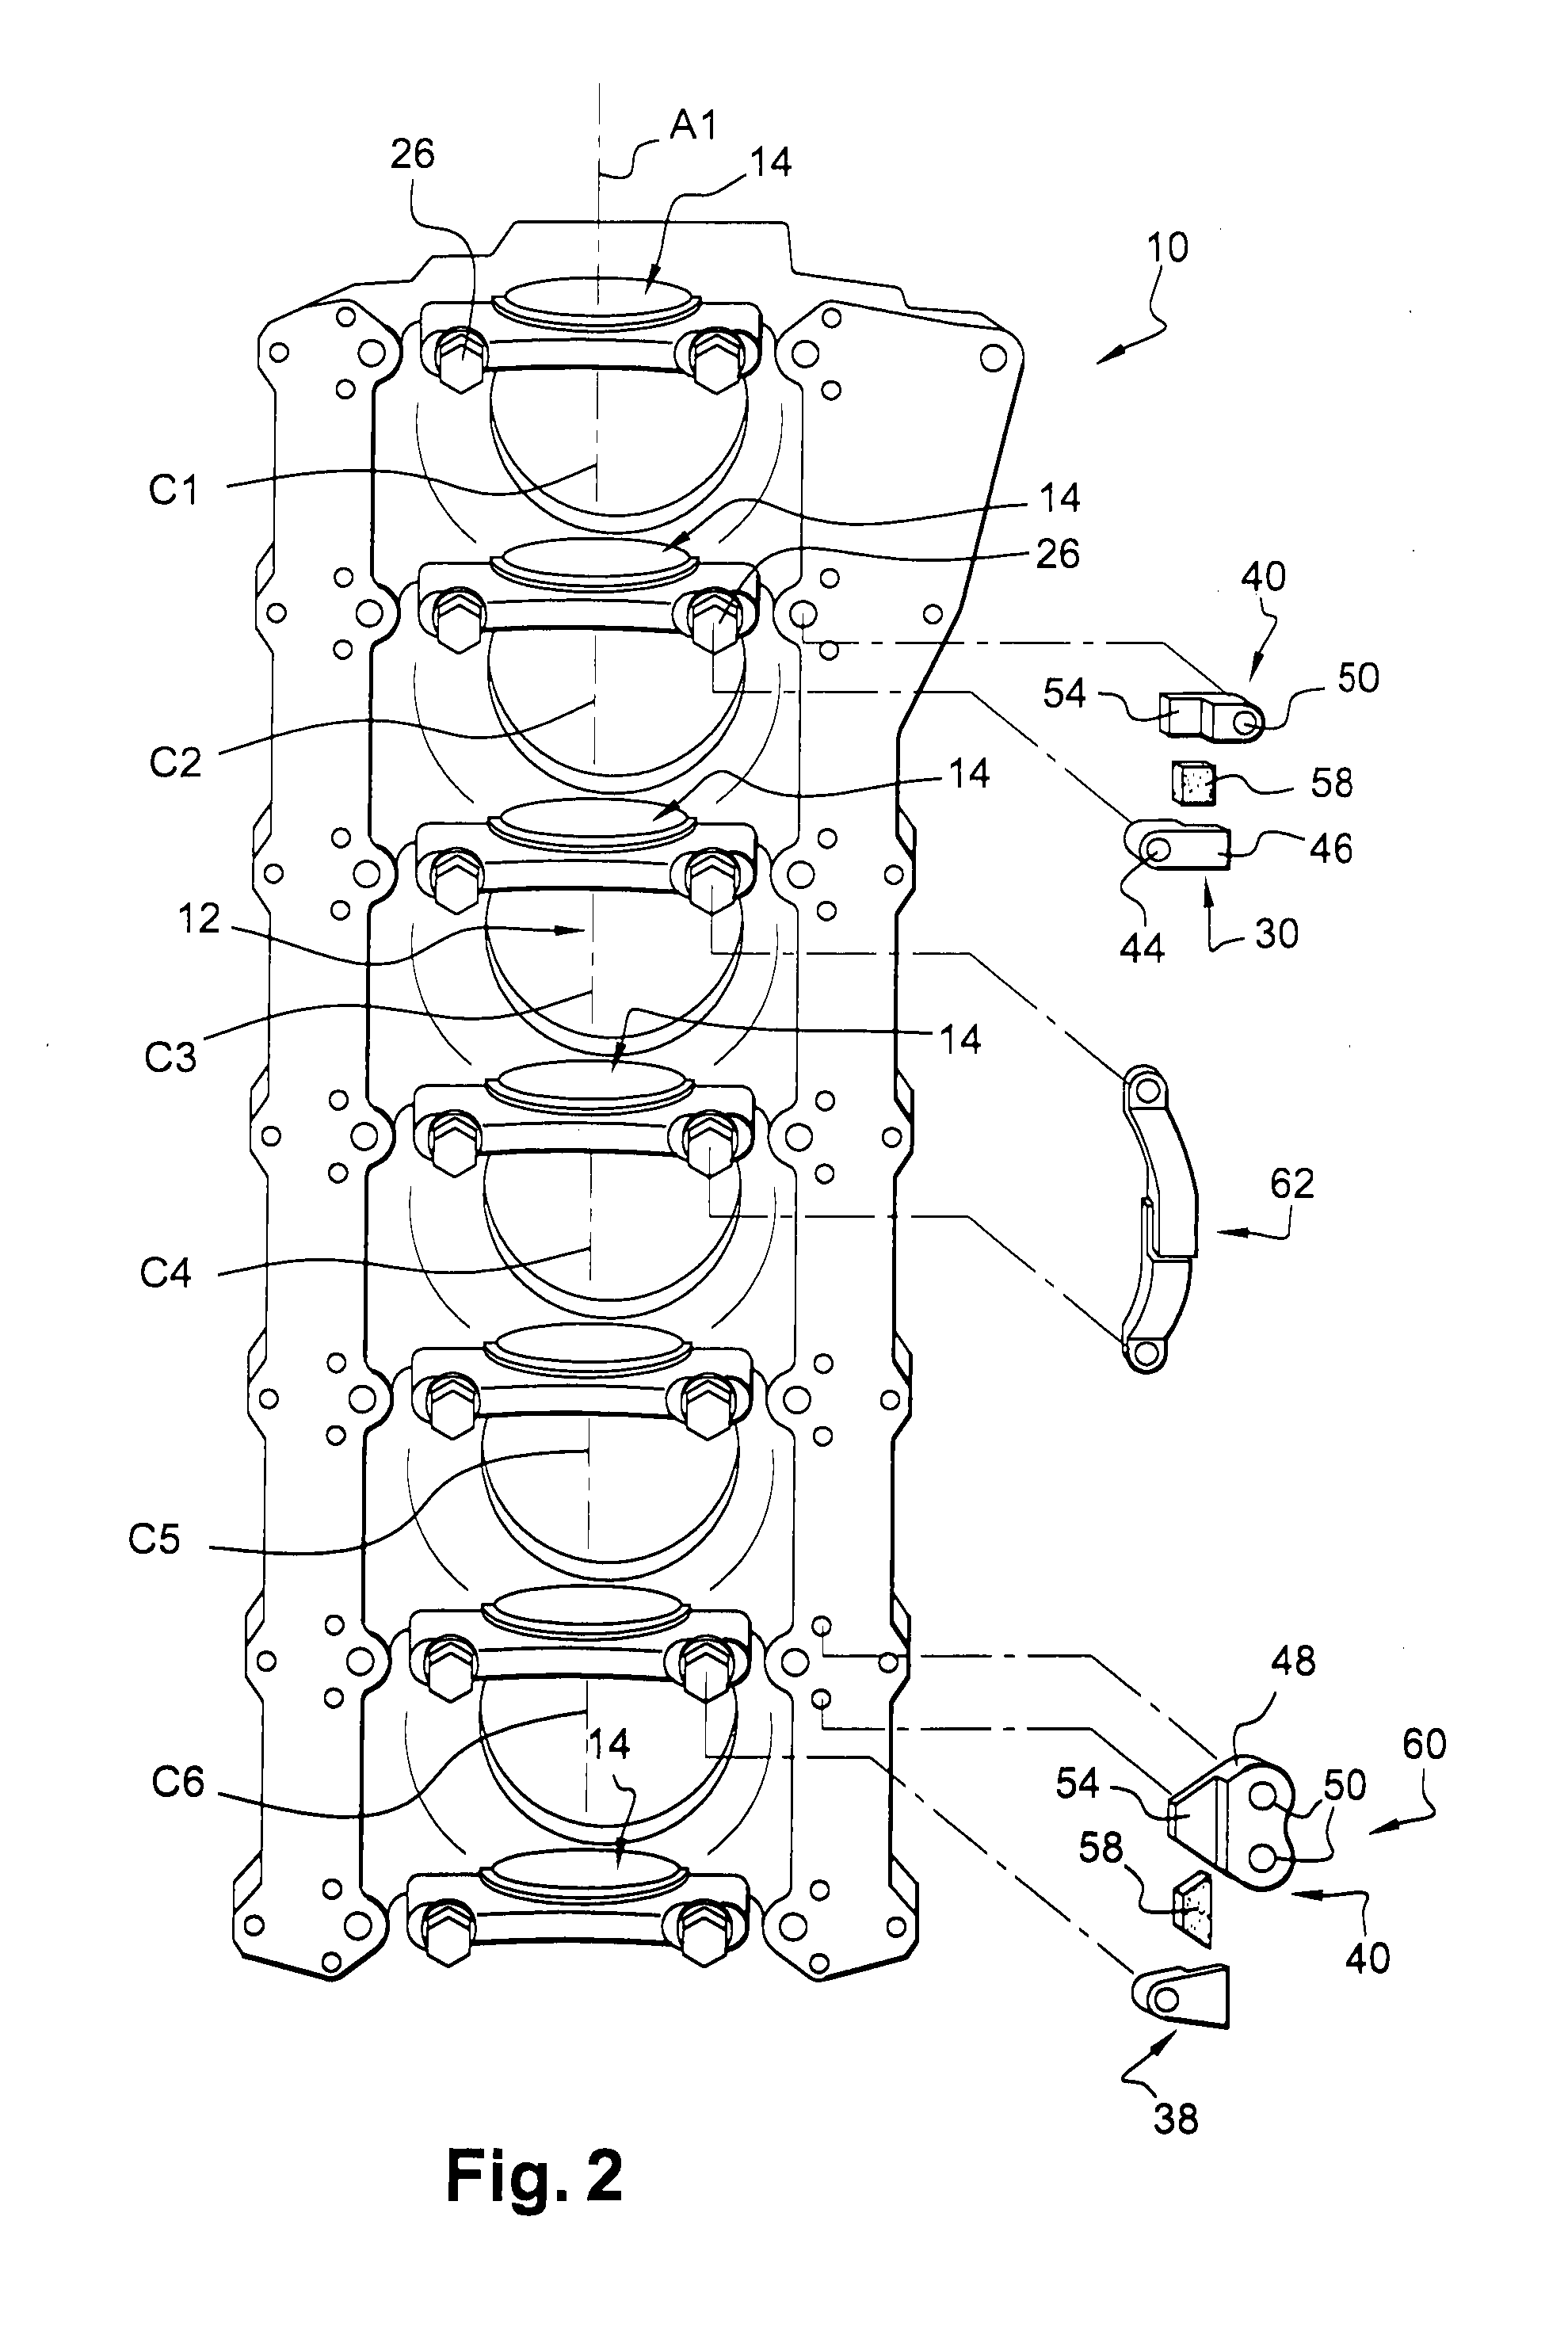 Improved internal combustion engine with bearing cap dampening